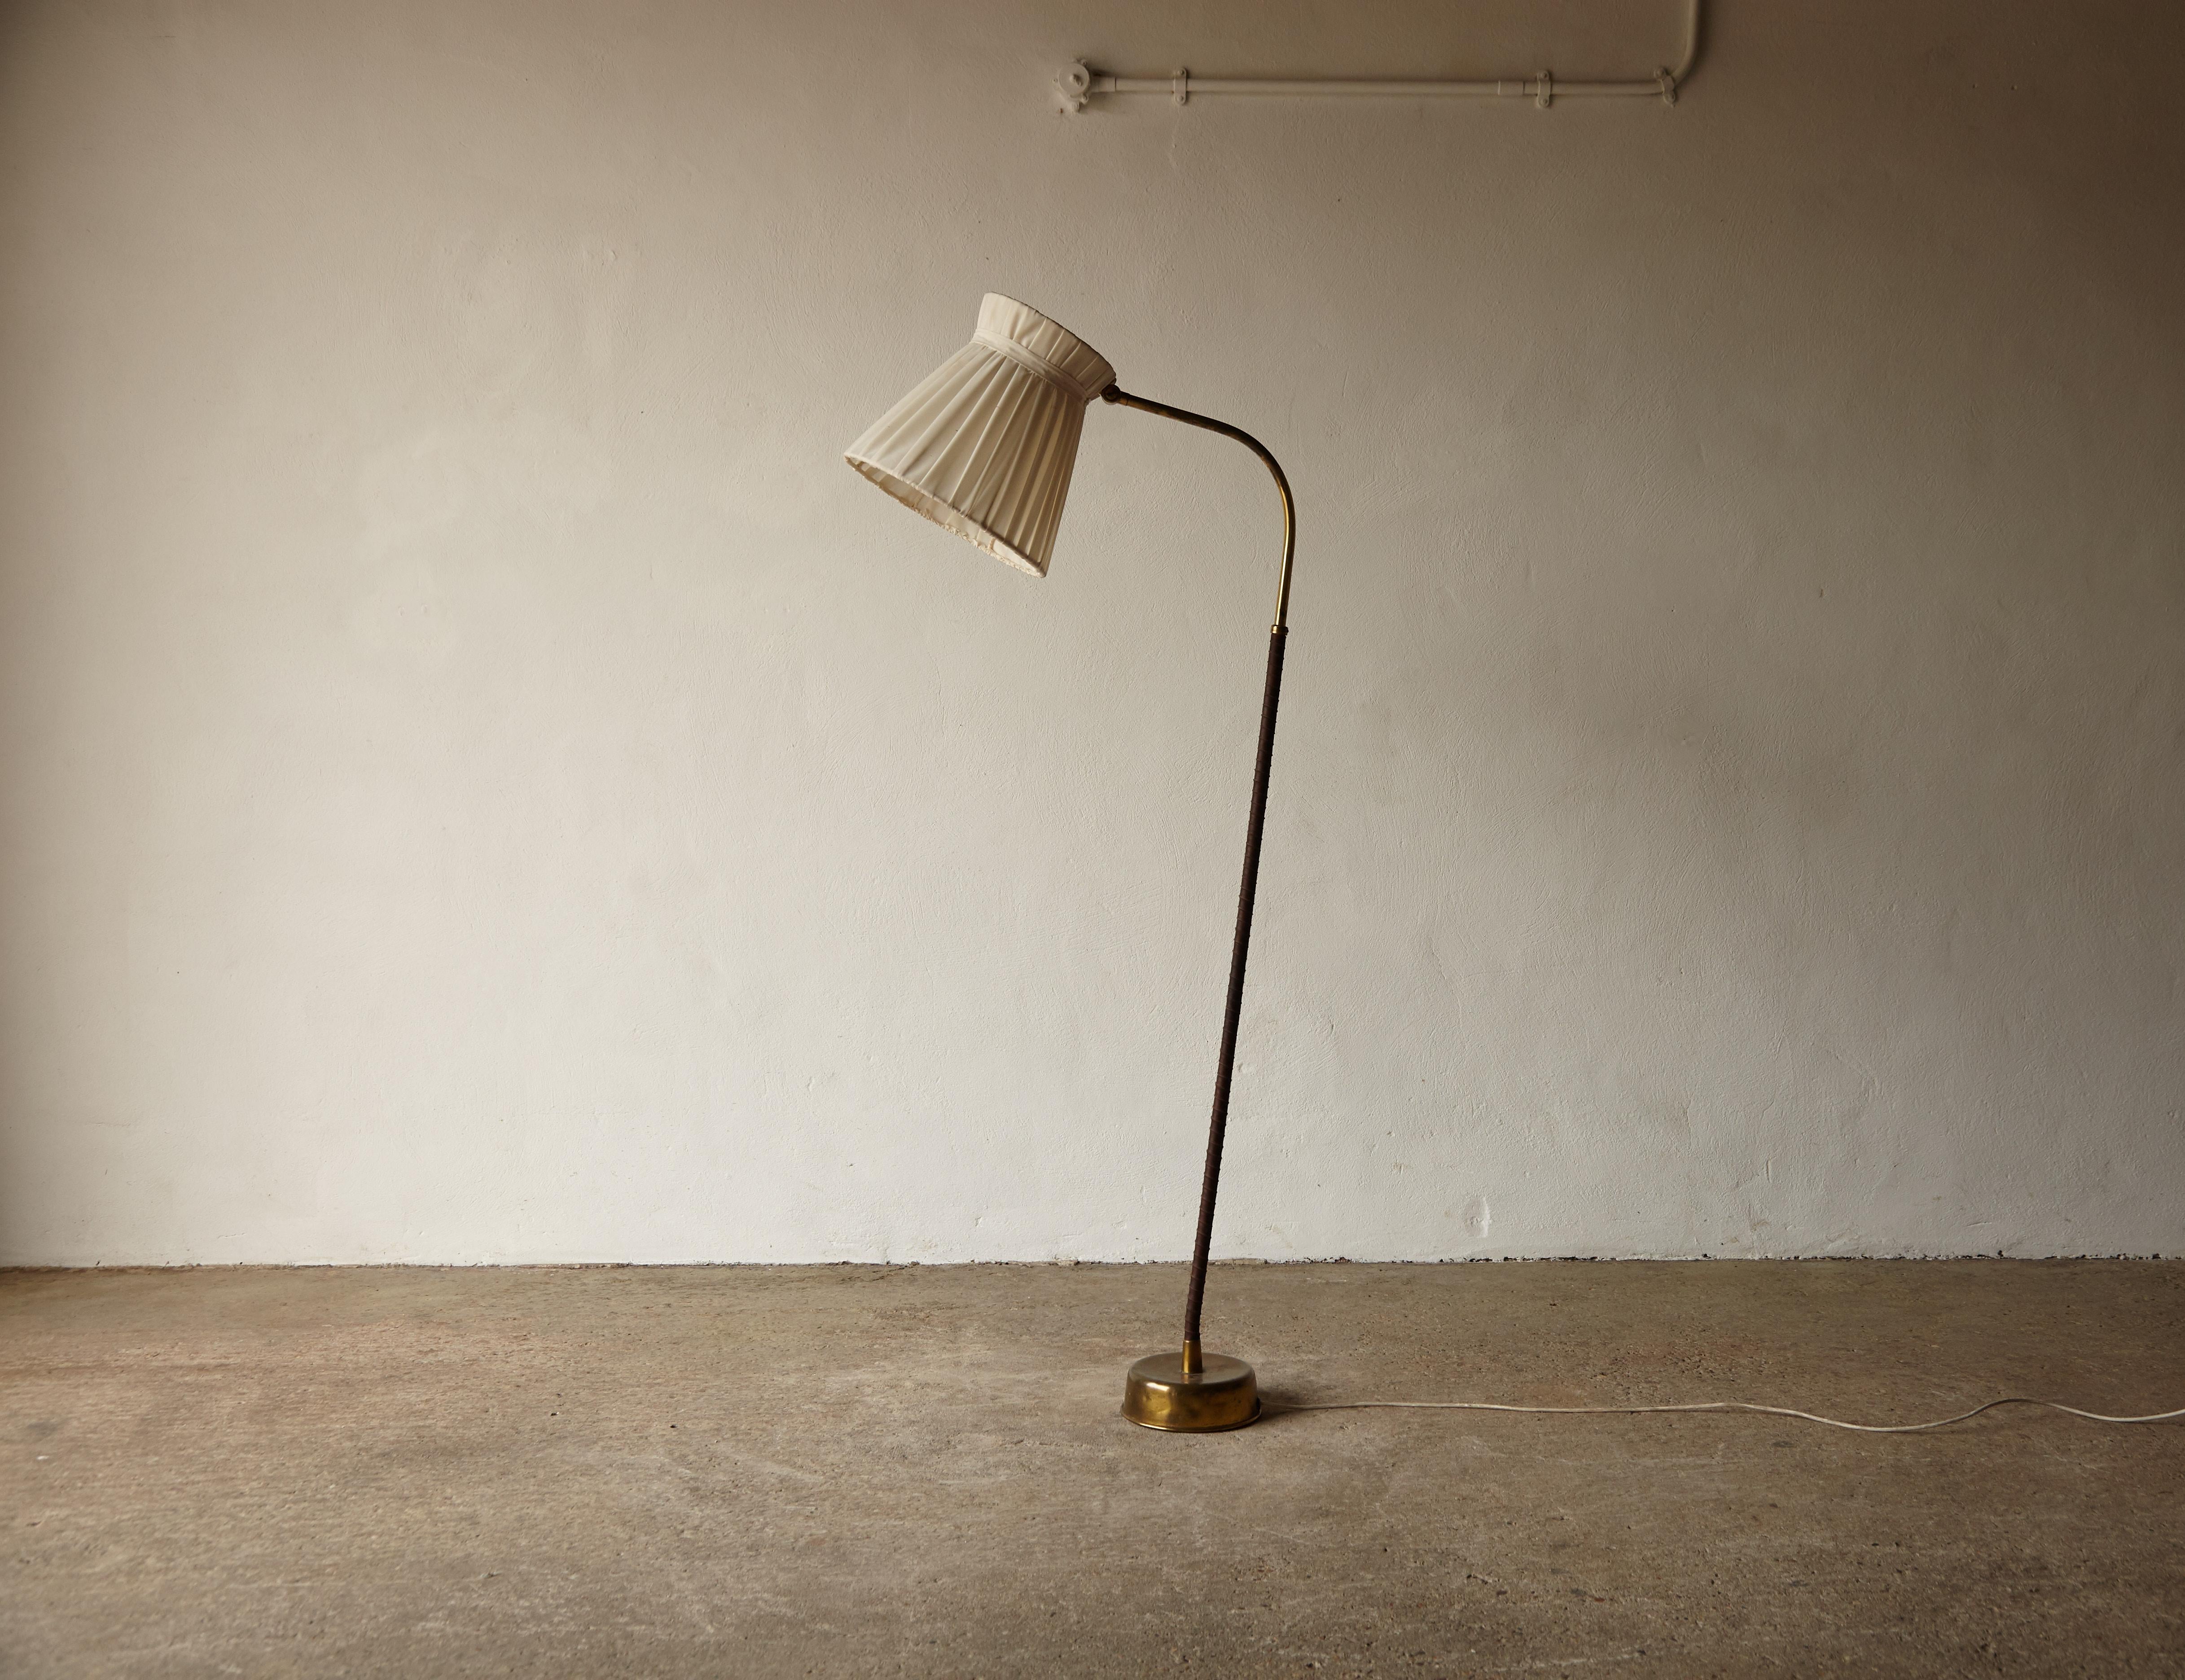 Original Lisa Johansson-Pape Model 2063 floor lamp for Stockmann Orno, Finland, 1950s. The lamp is in original condition, with patina to the brass, the leather stem re-done, and the original shade fabric shows some stains (see photos) so may benefit